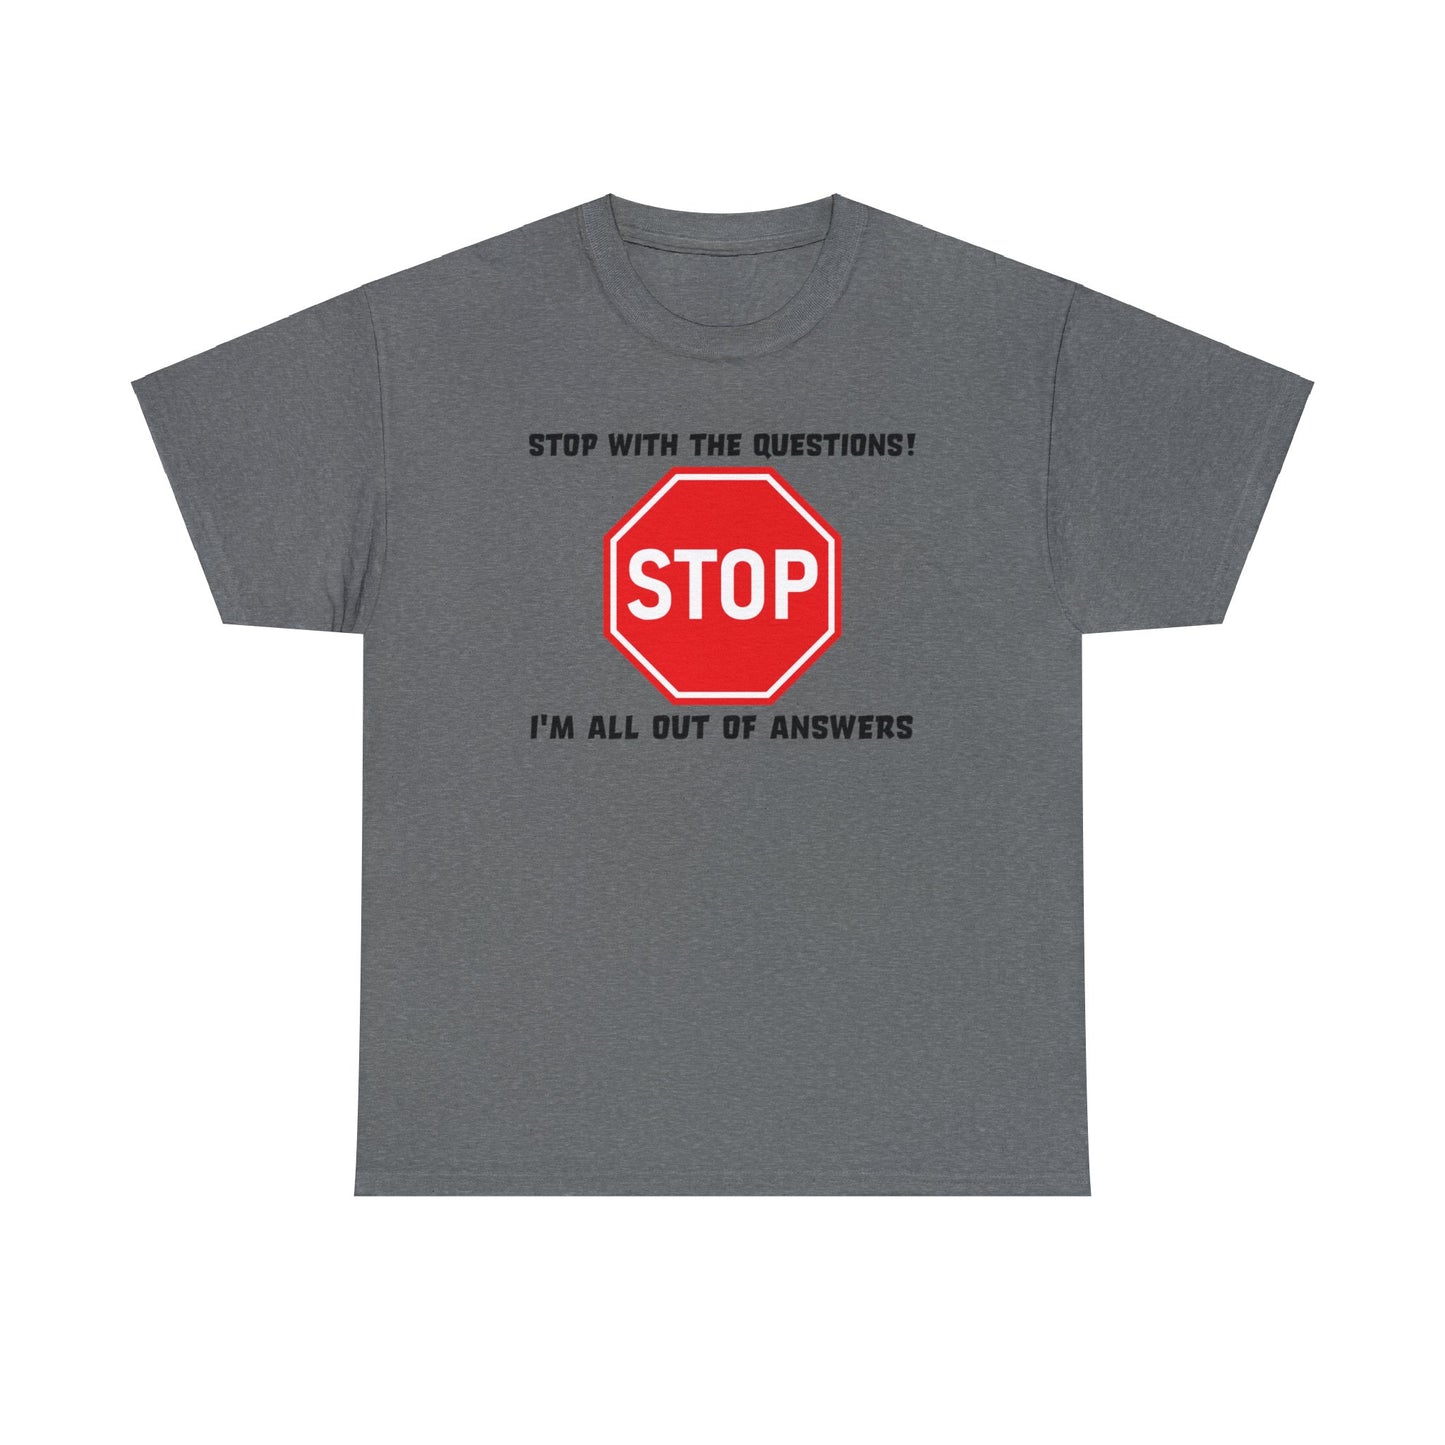 Stop With The Questions TShirt For No More Answers TShirt For Be Quiet T Shirt